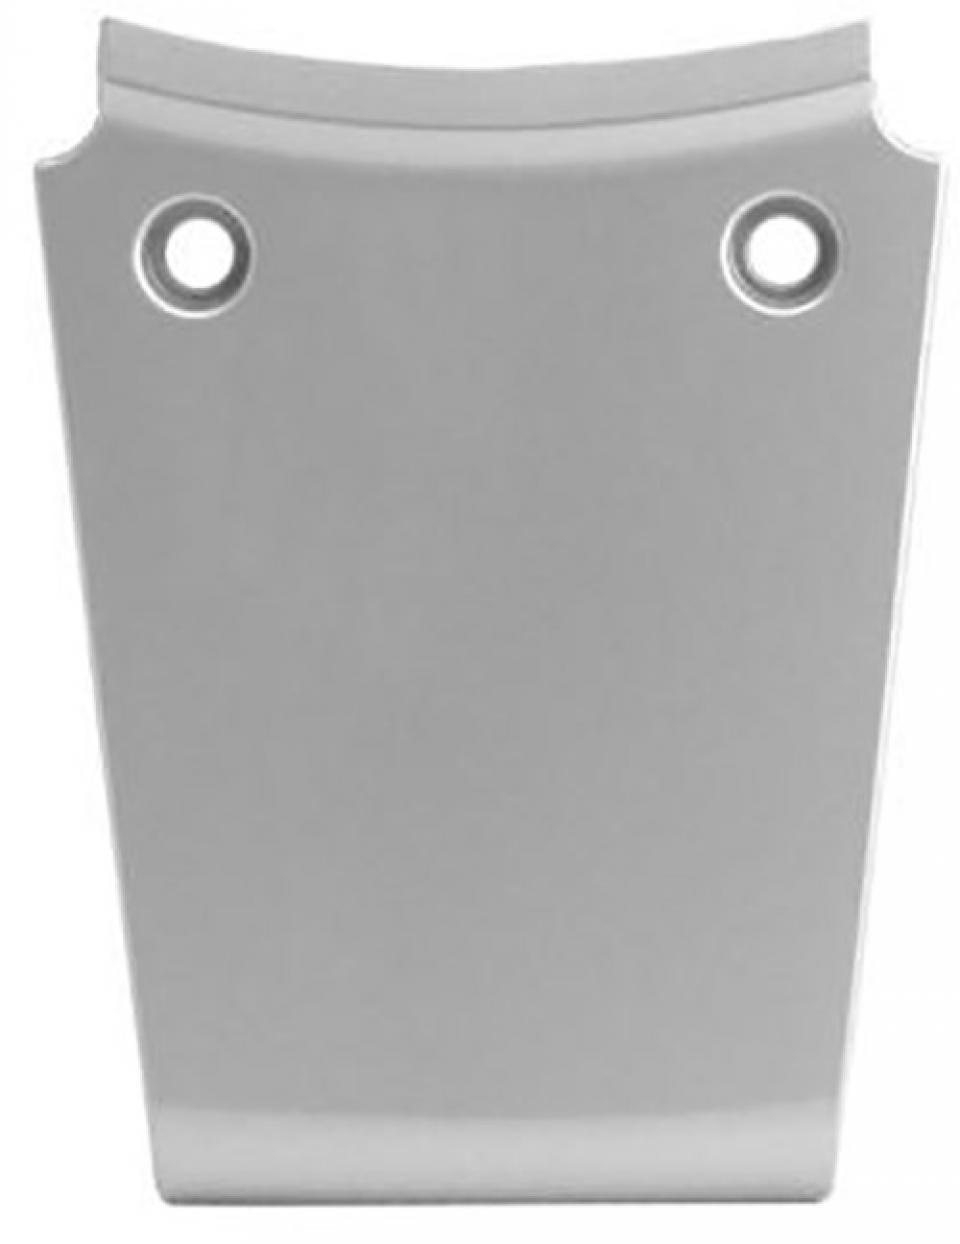 Inter coque arrière One pour scooter Gilera 50 Stalker Neuf - Photo 1/1